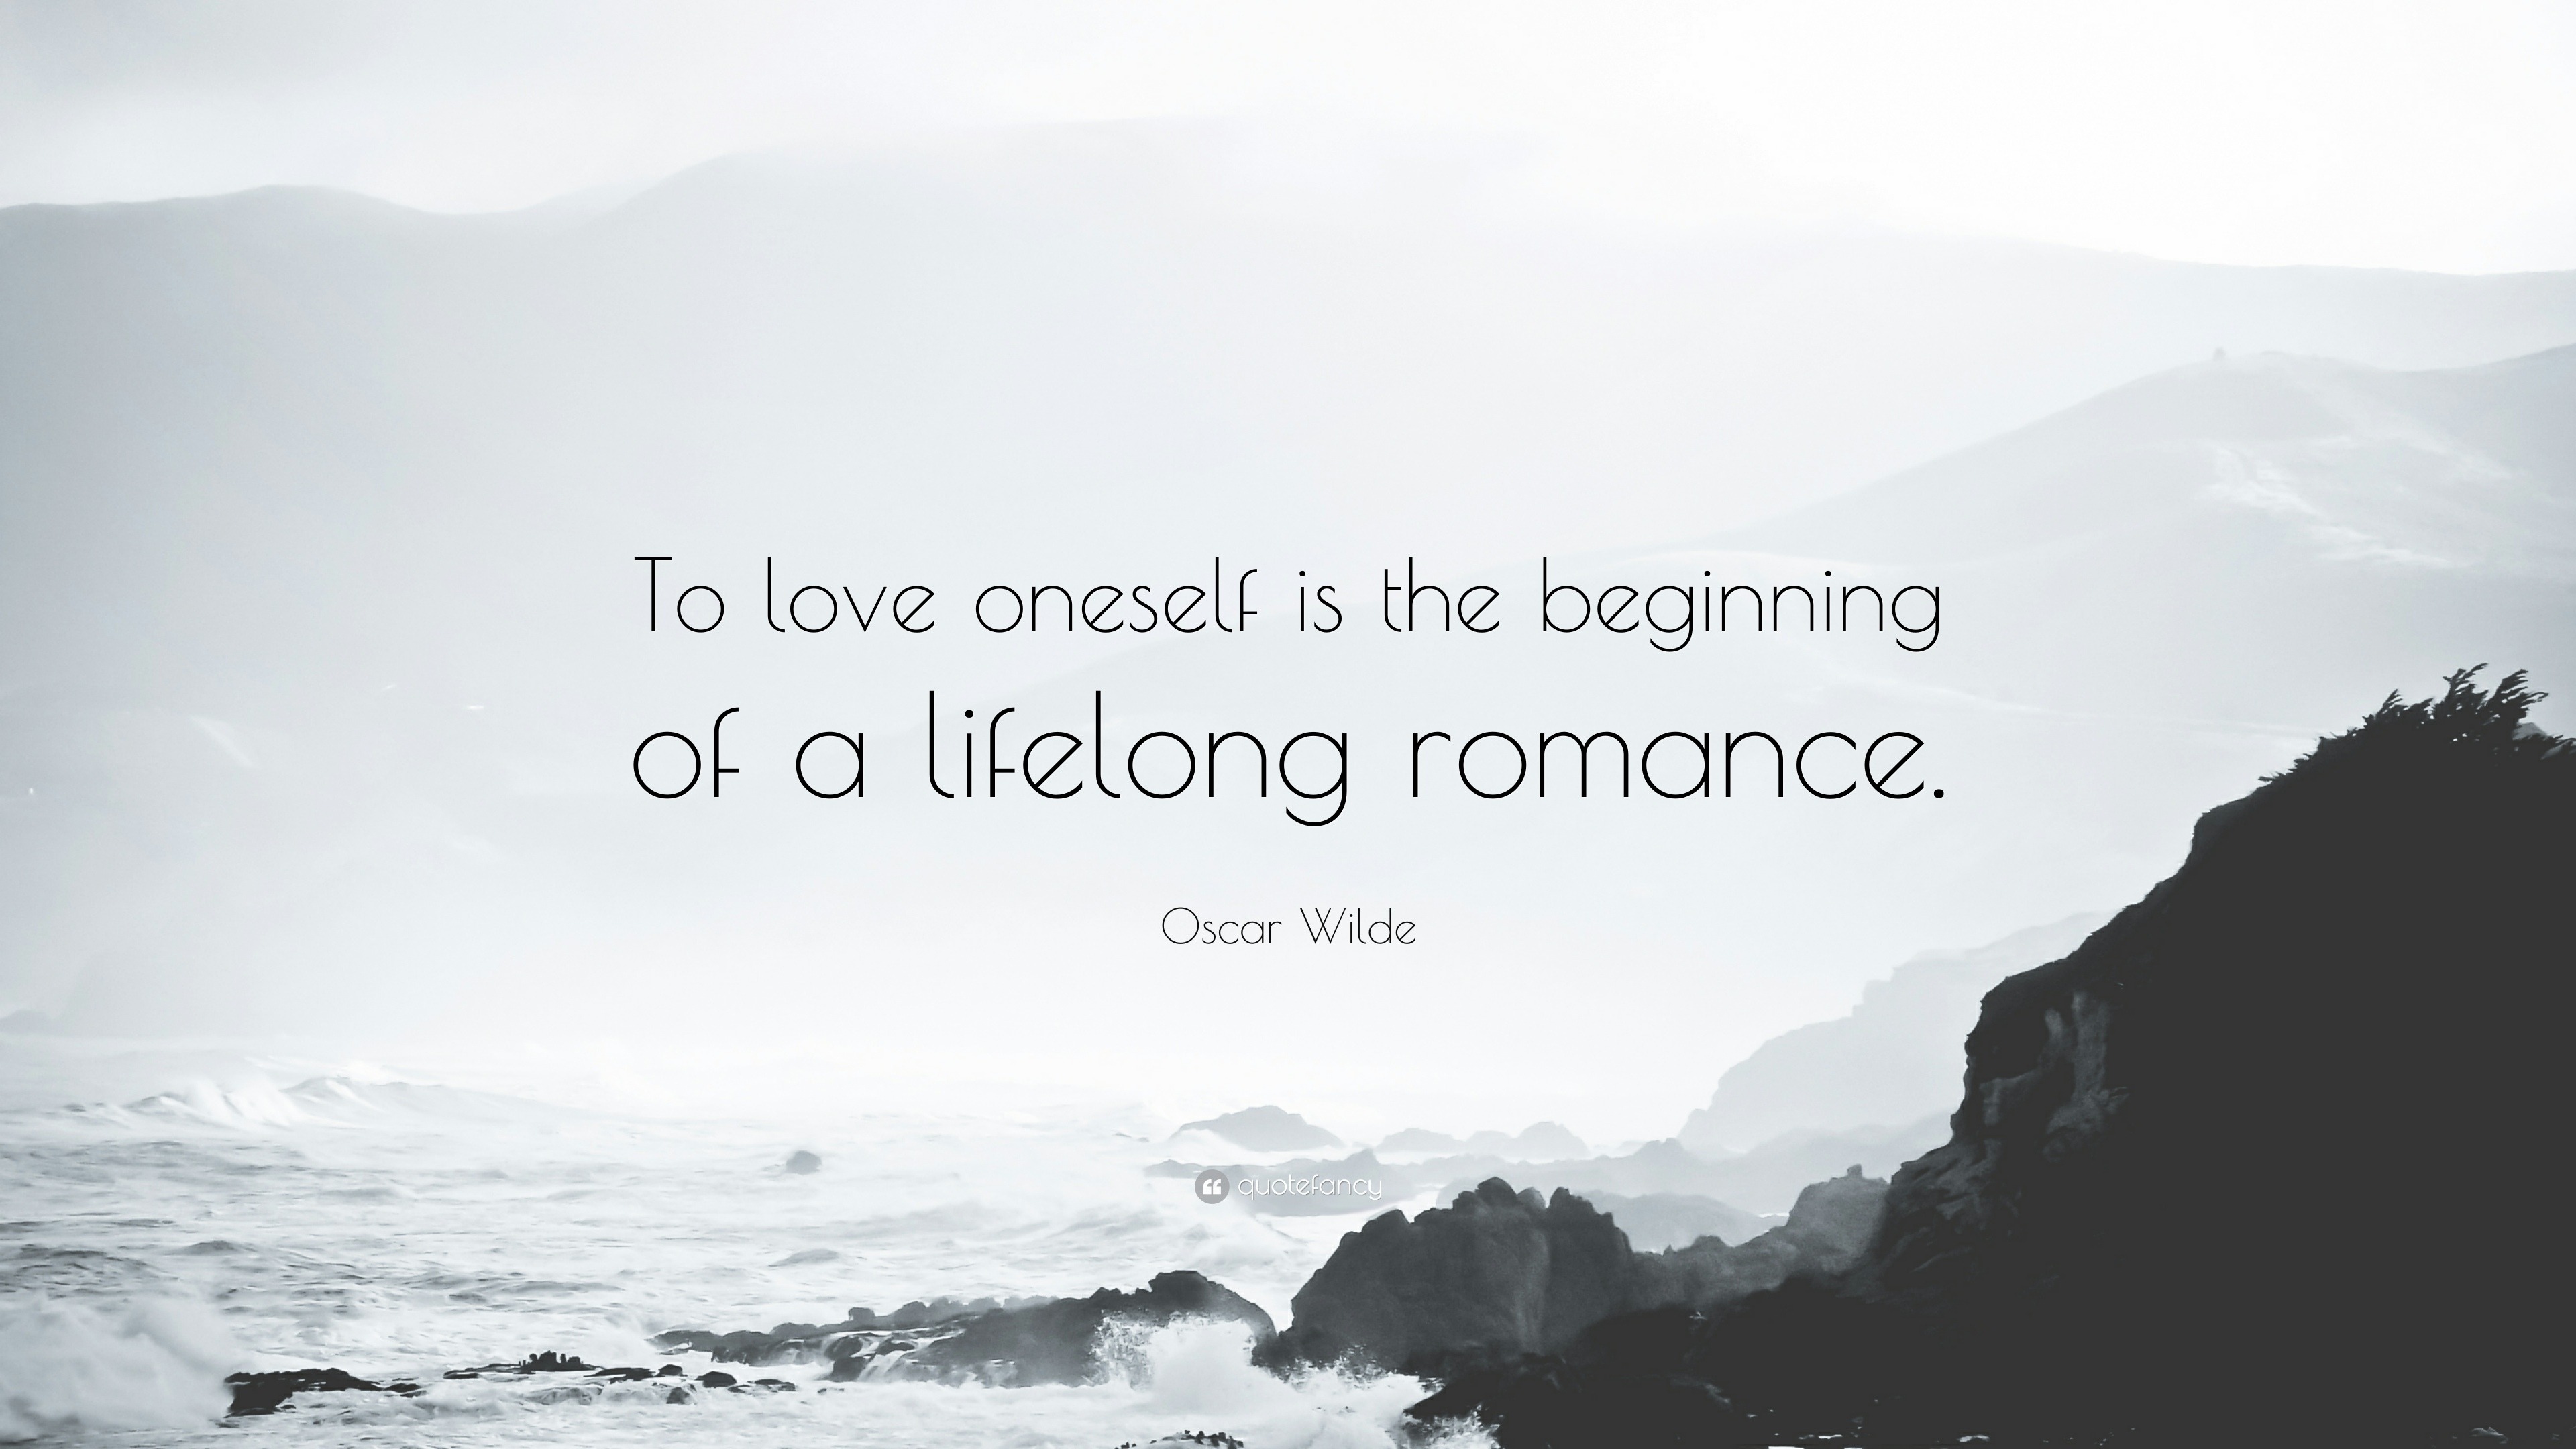 Oscar Wilde Quote: “To love oneself is the beginning of a lifelong